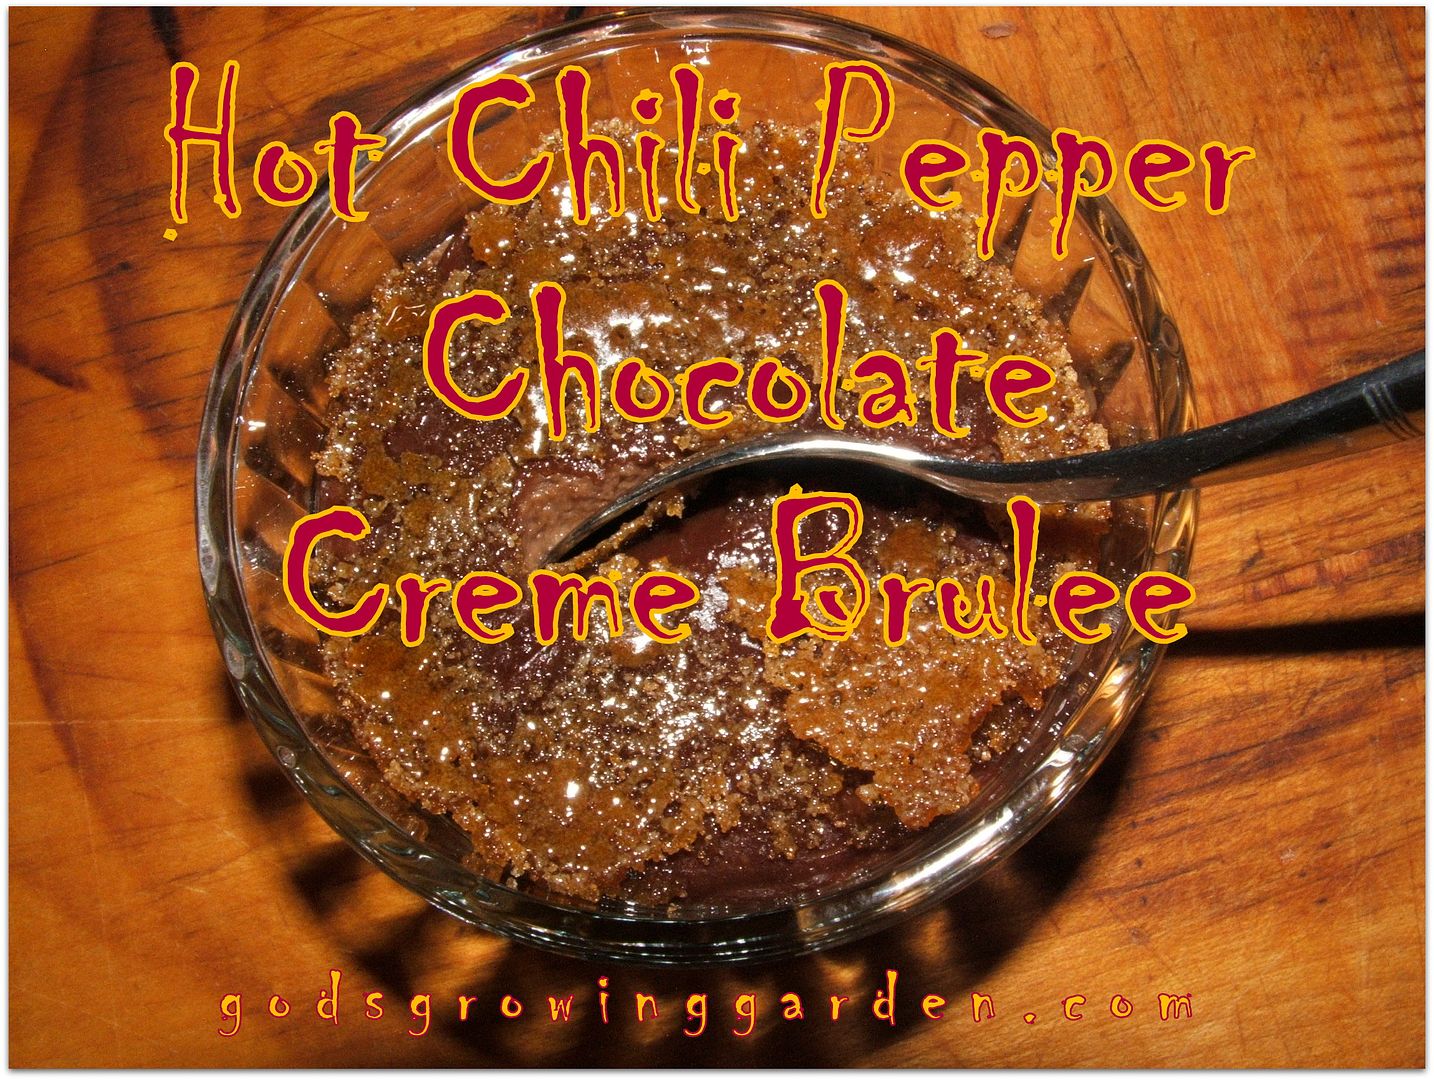 Chili Pepper Chocolate Creme Brulee by Angie Ouellette-Tower photo 007_zpsbece2a2b.jpg